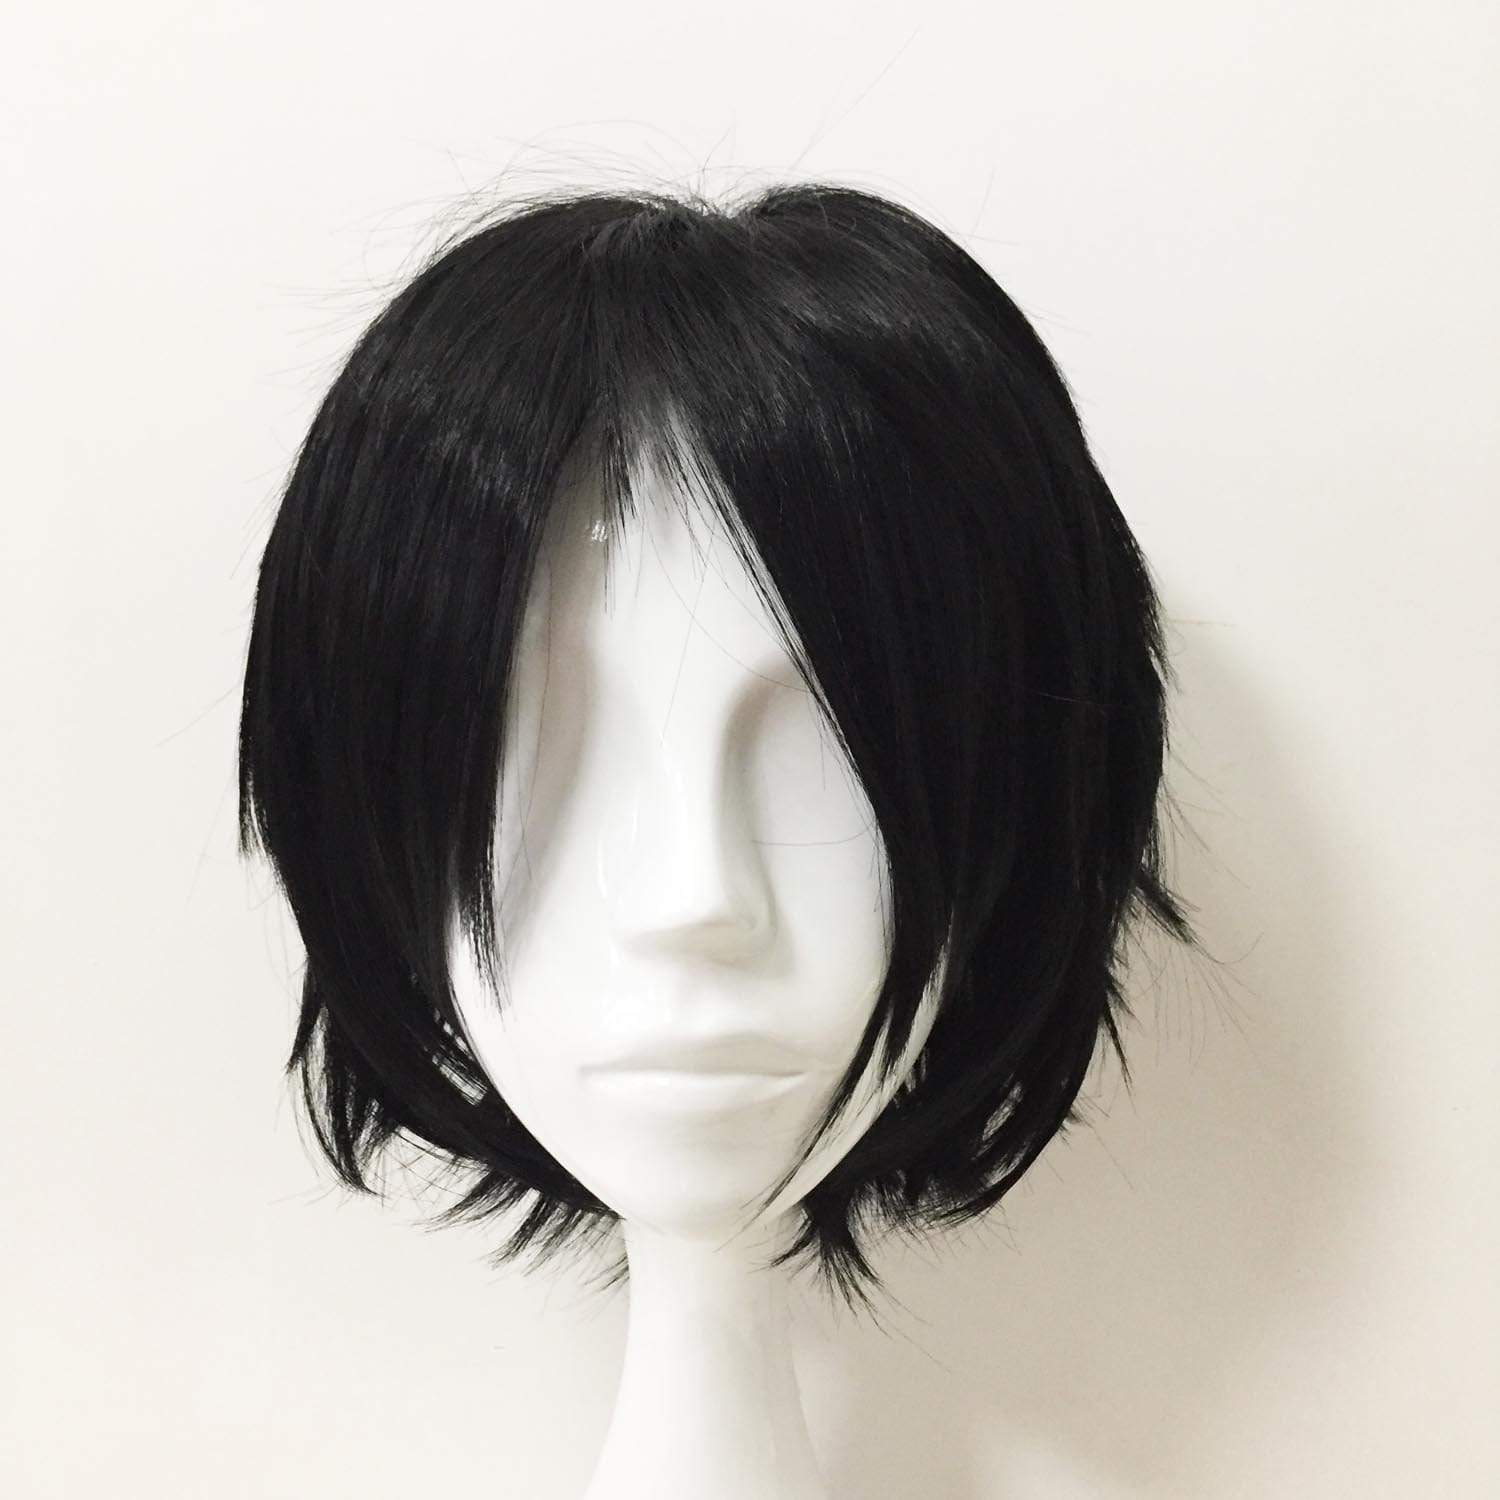 nevermindyrhead Men Black Straight Long Bangs Middle Part Cosplay Wig